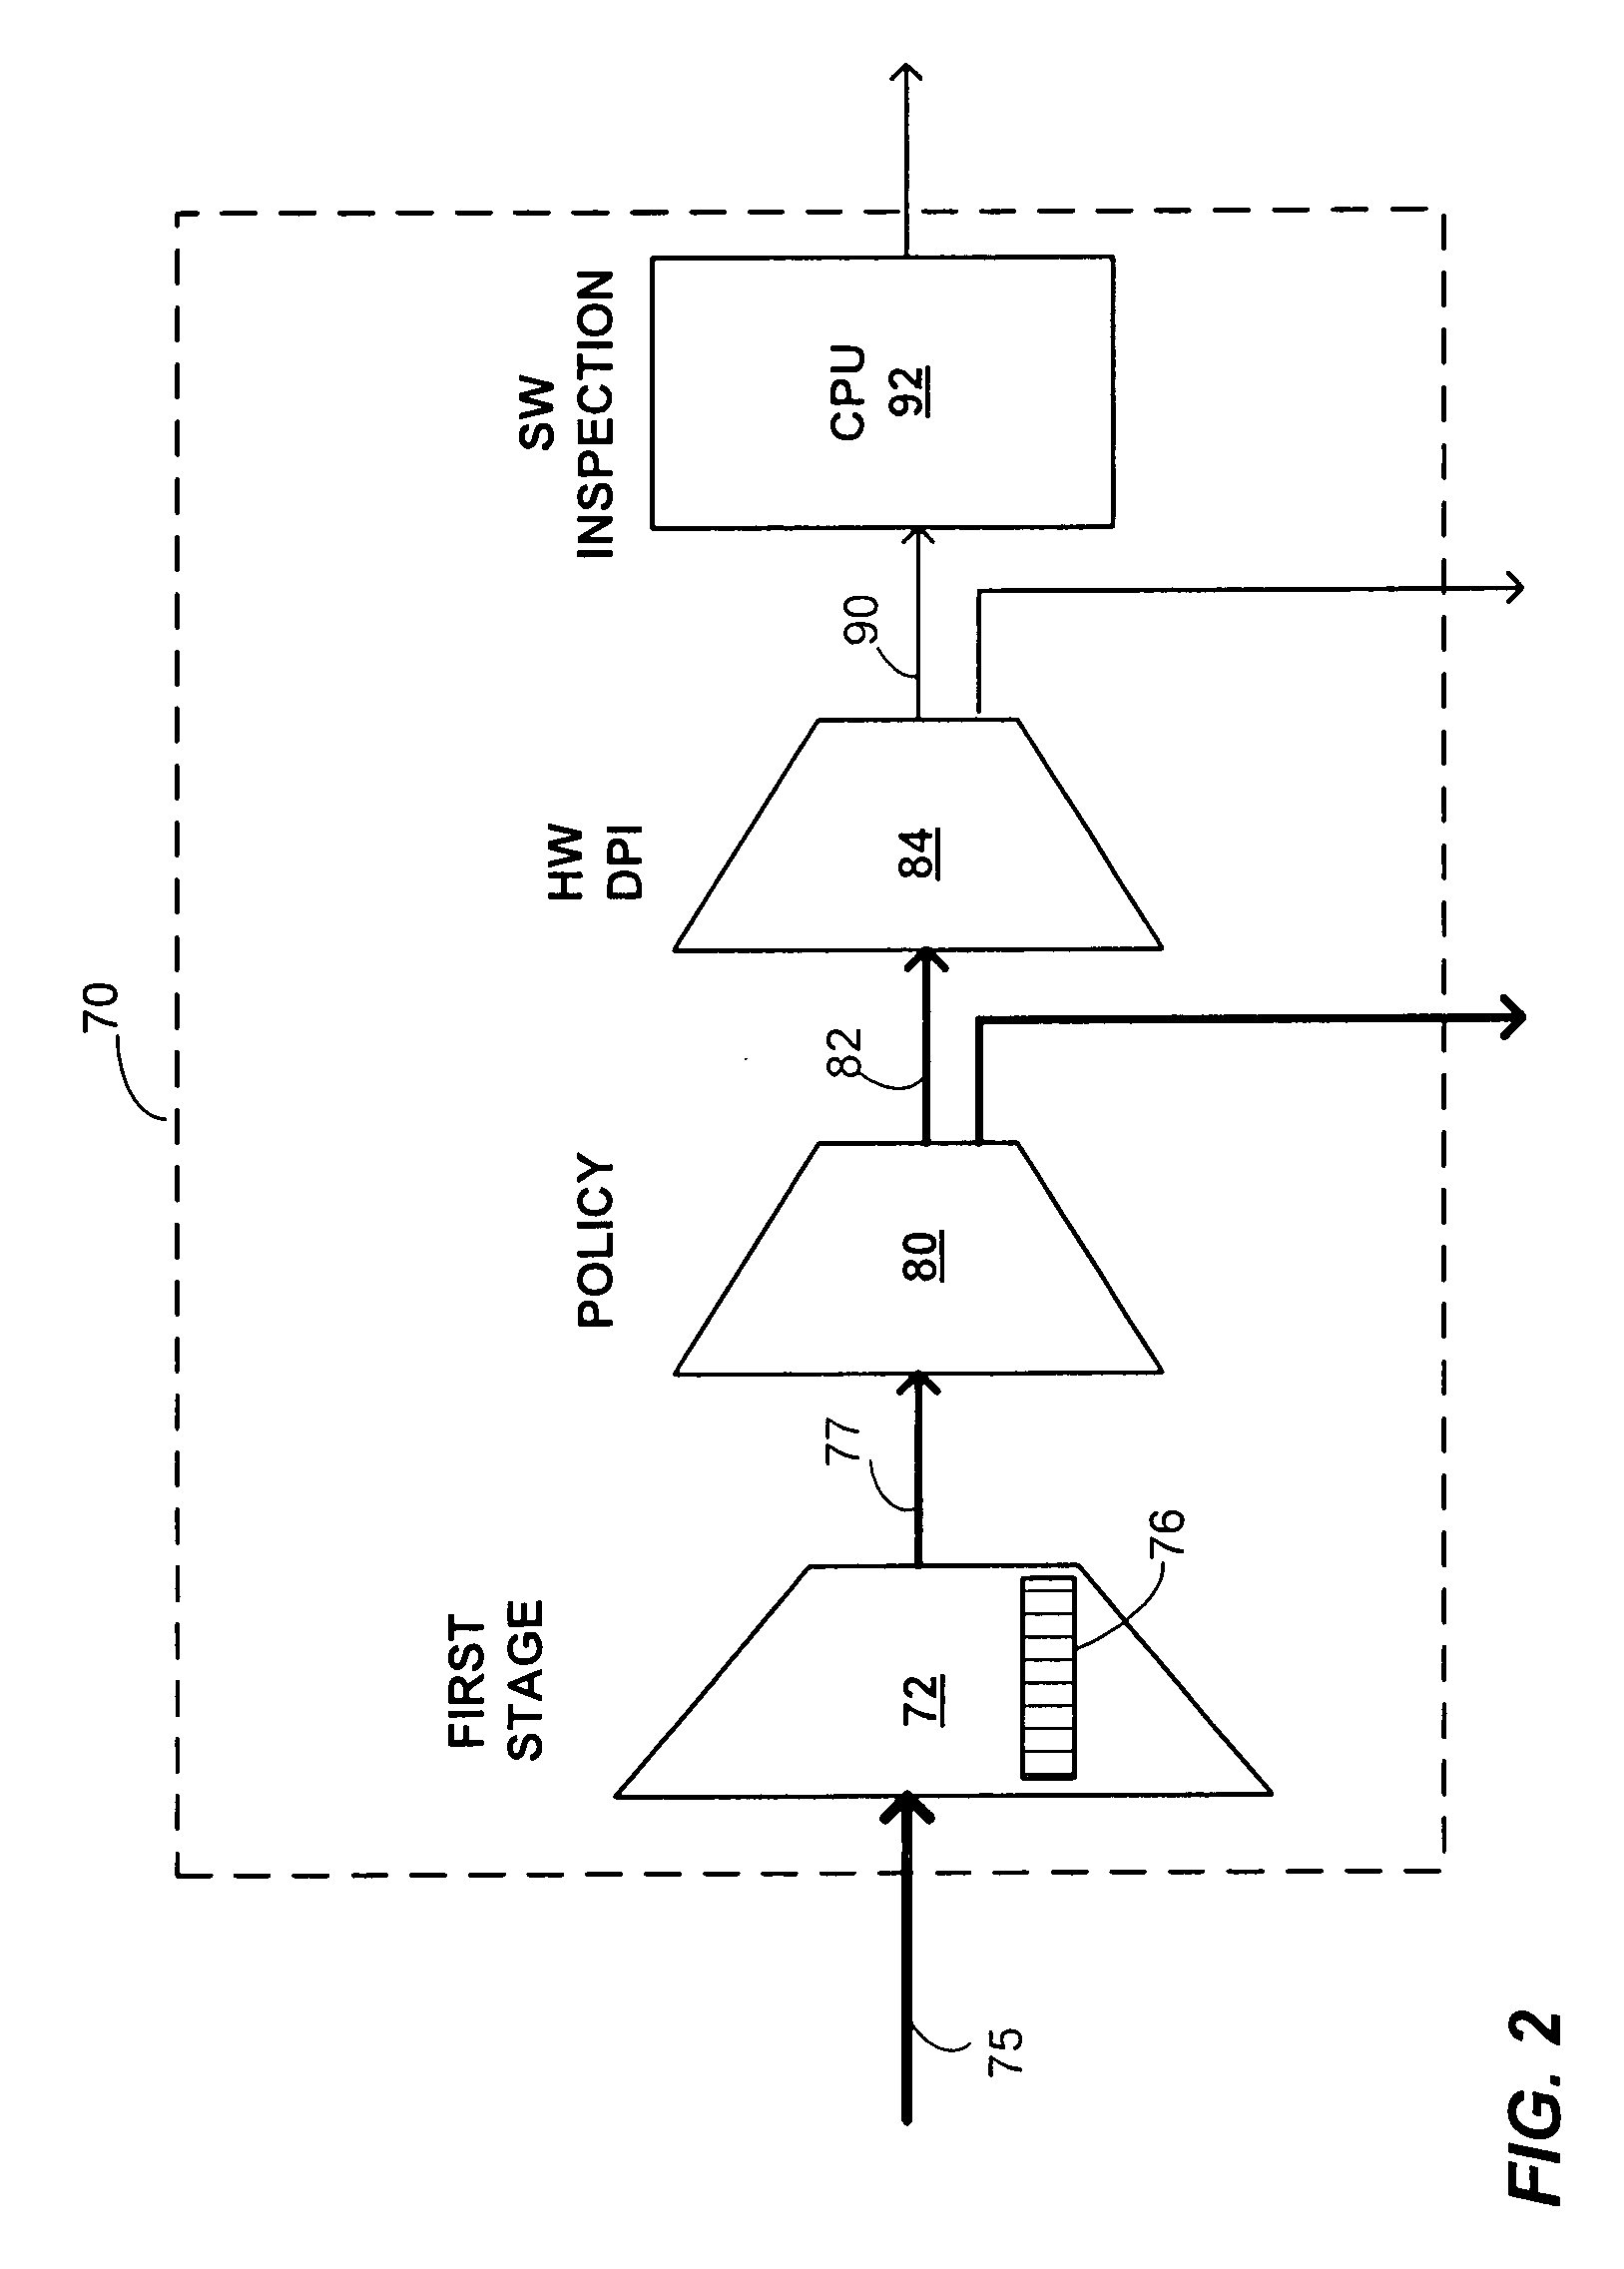 Method and Apparatus for Deep Packet Inspection for Network Intrusion Detection